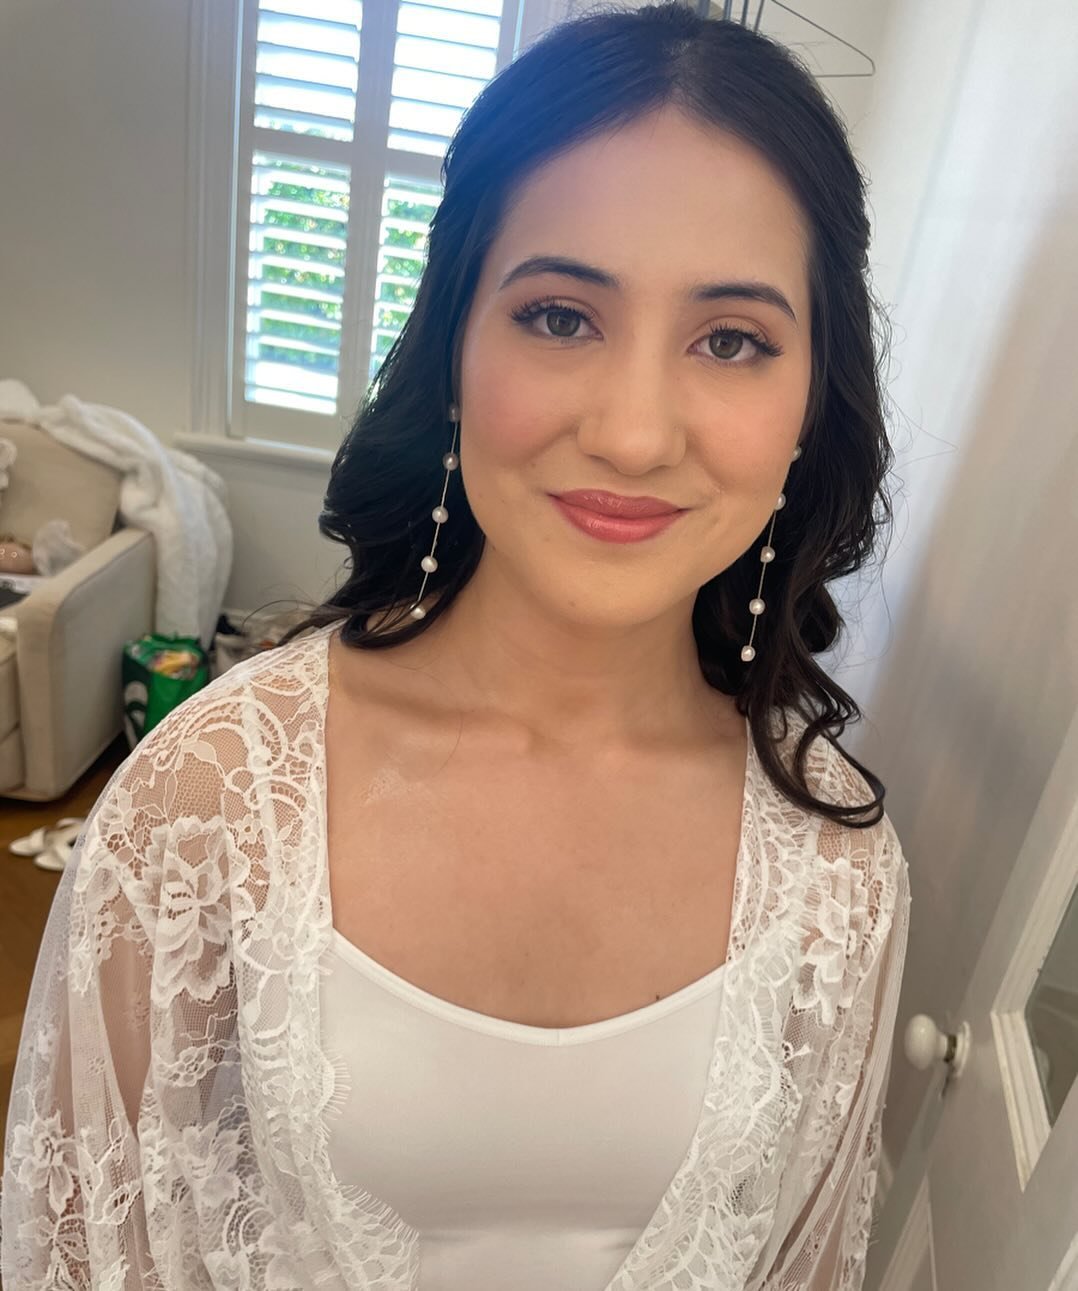 Yesterday&rsquo;s beautiful bride for @southcoasthairandmakeup at the beautiful @ravensthorpeweddings #southcoastwedding #makeupartist #bridetobe #softmakeup #2024bride #2024wedding #mobilemakeupartist #illawarramakeupartist #southcoastmakeupartist